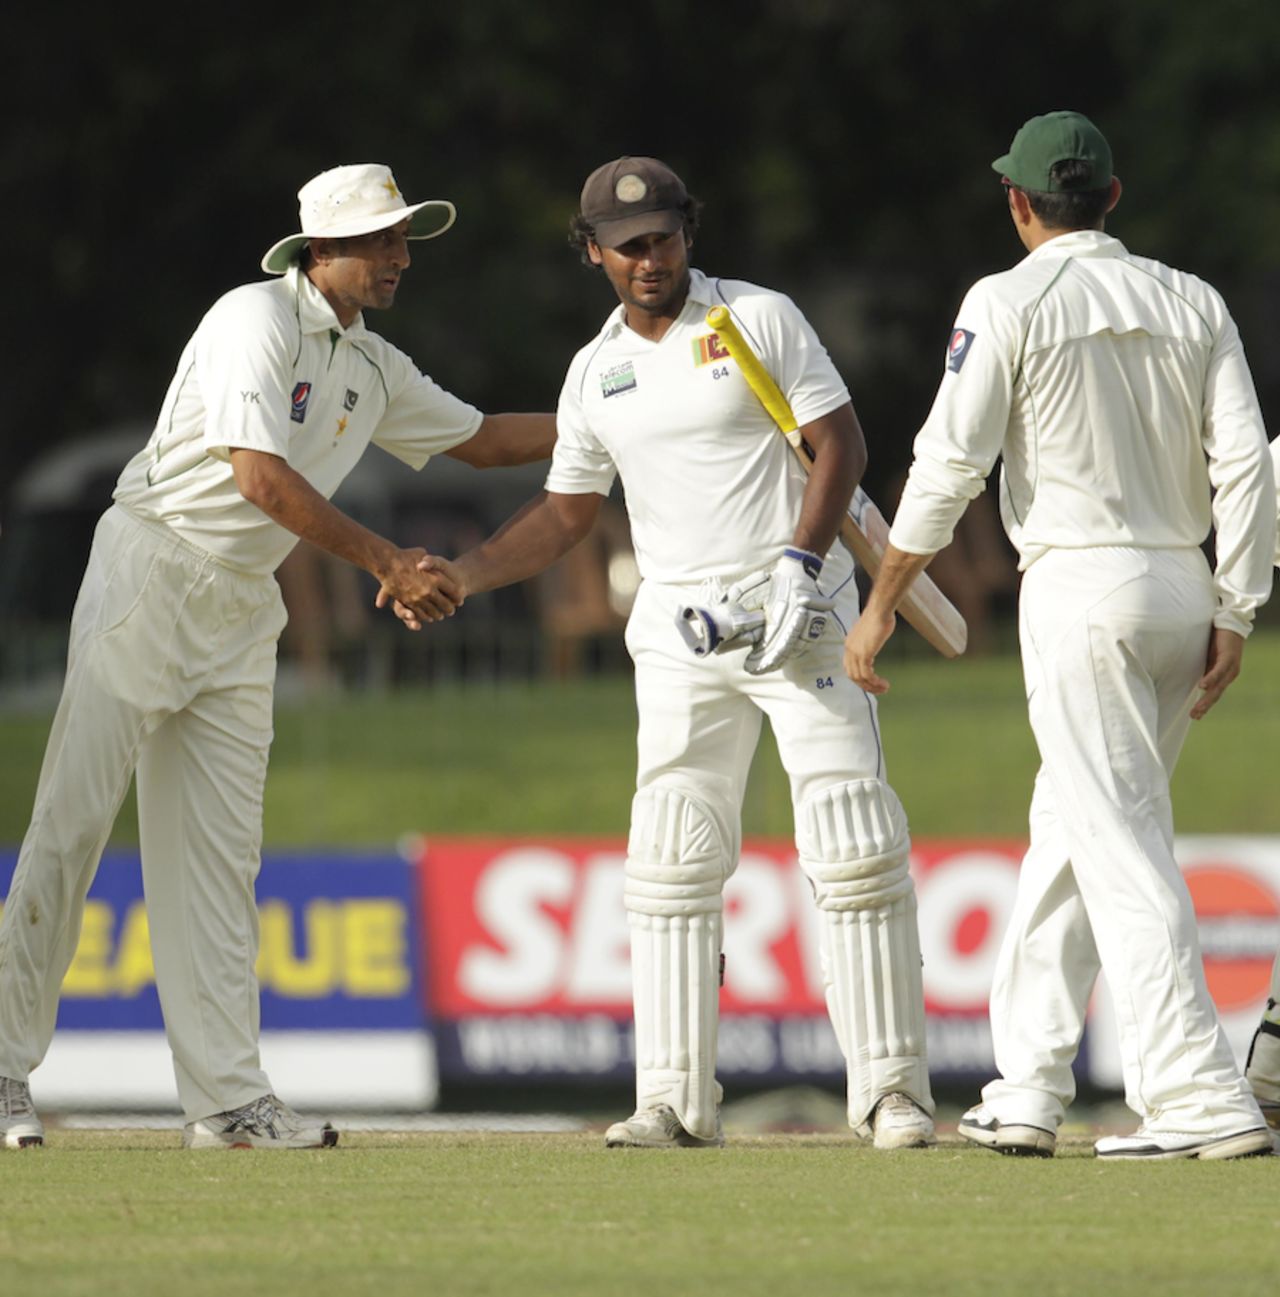 Players shake hands as the second Test ends in a draw, Sri Lanka v Pakistan, 2nd Test, SSC, Colombo, 5th day, July 4, 2012